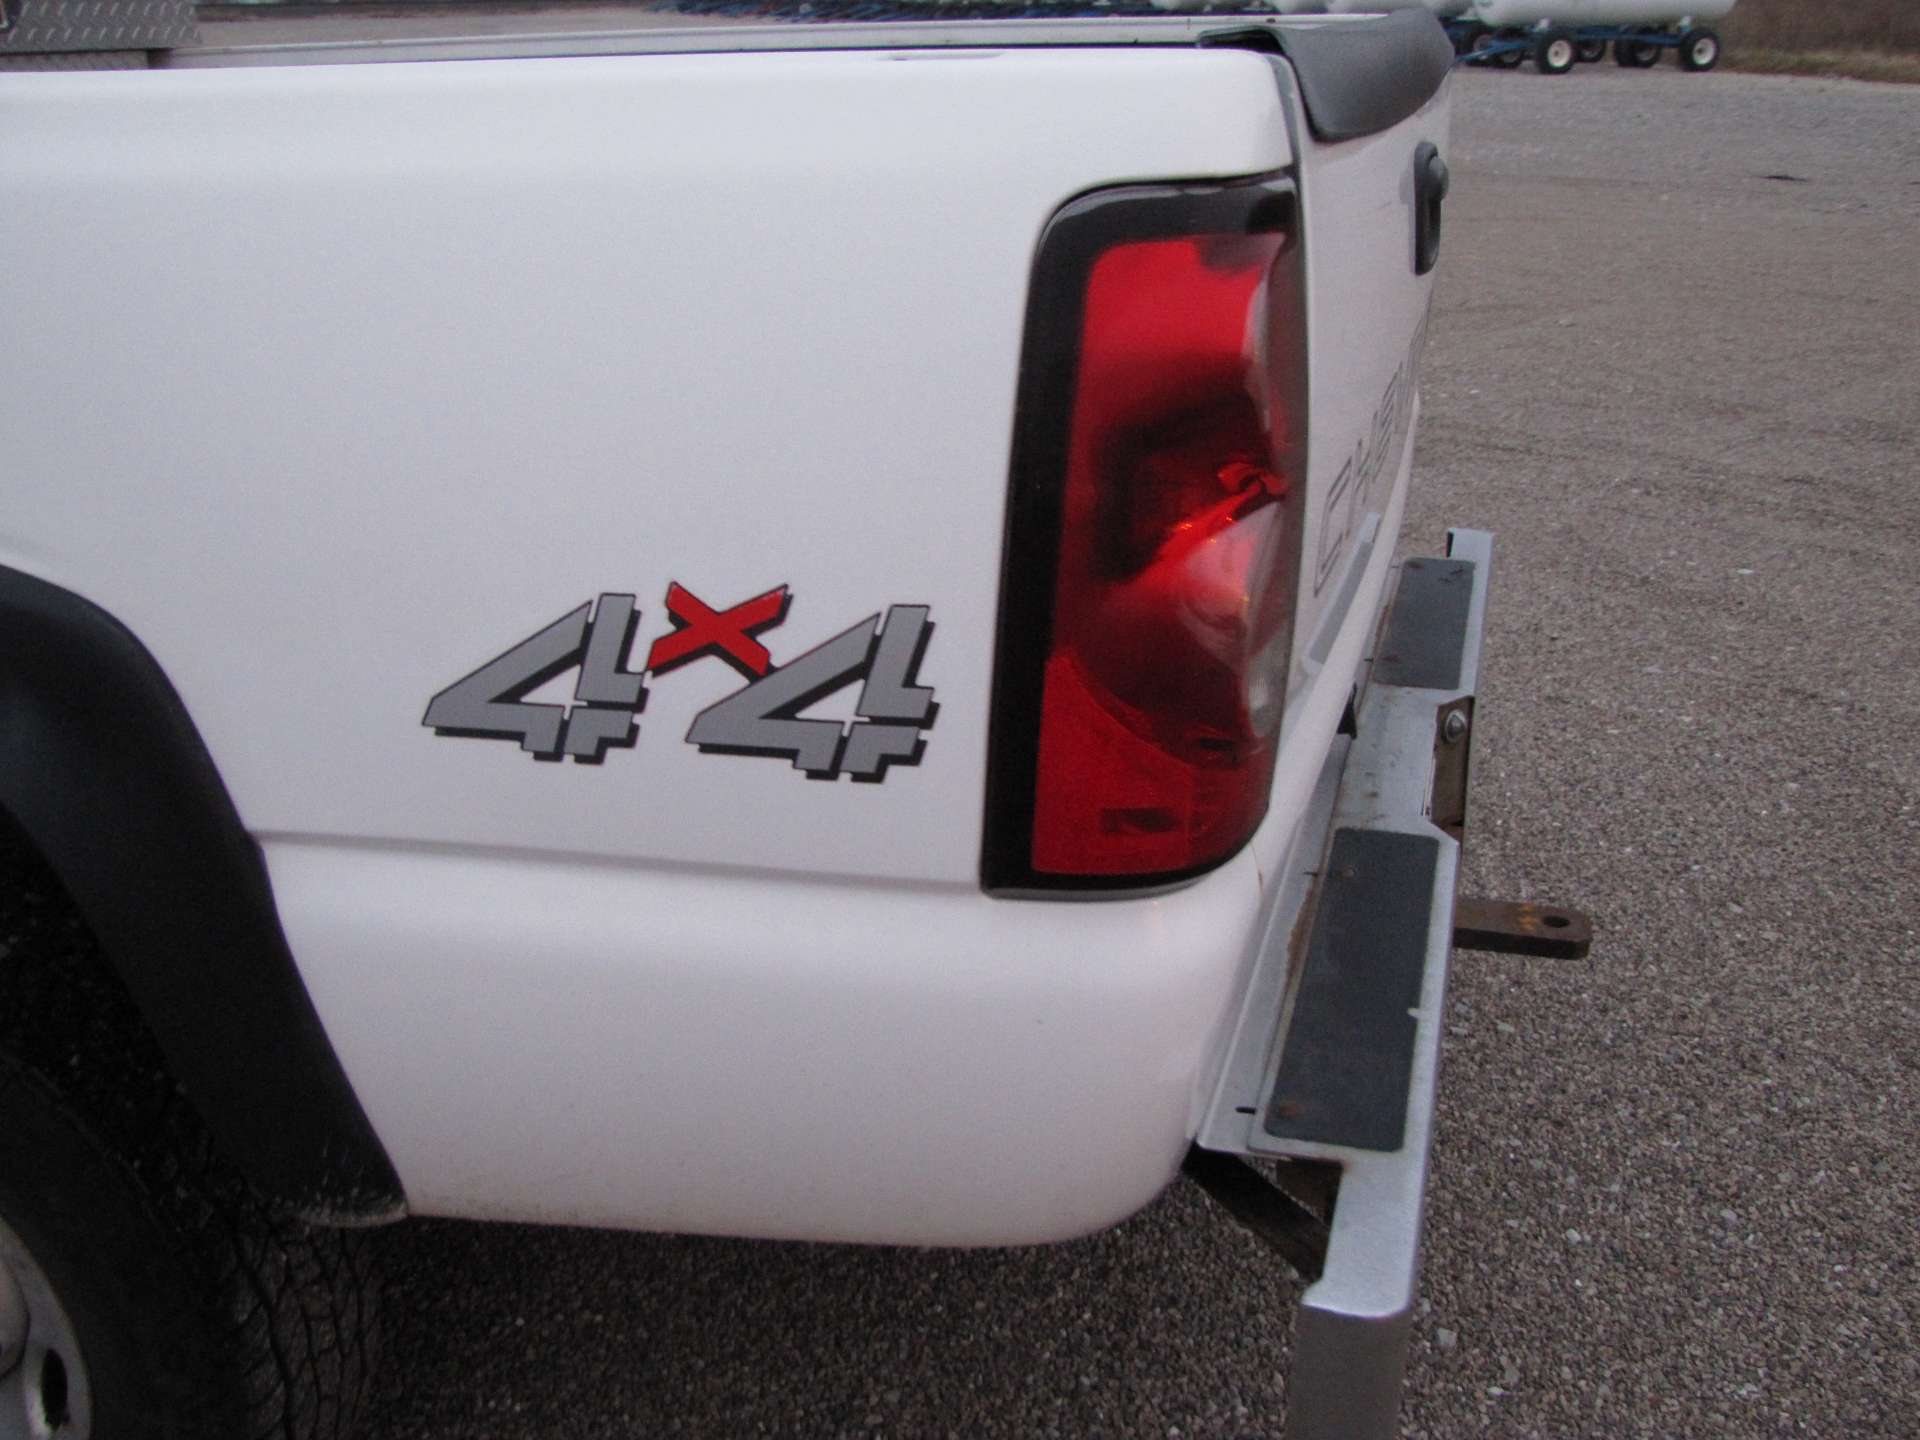 2006 Chevy 2500 HD pickup truck - Image 29 of 65